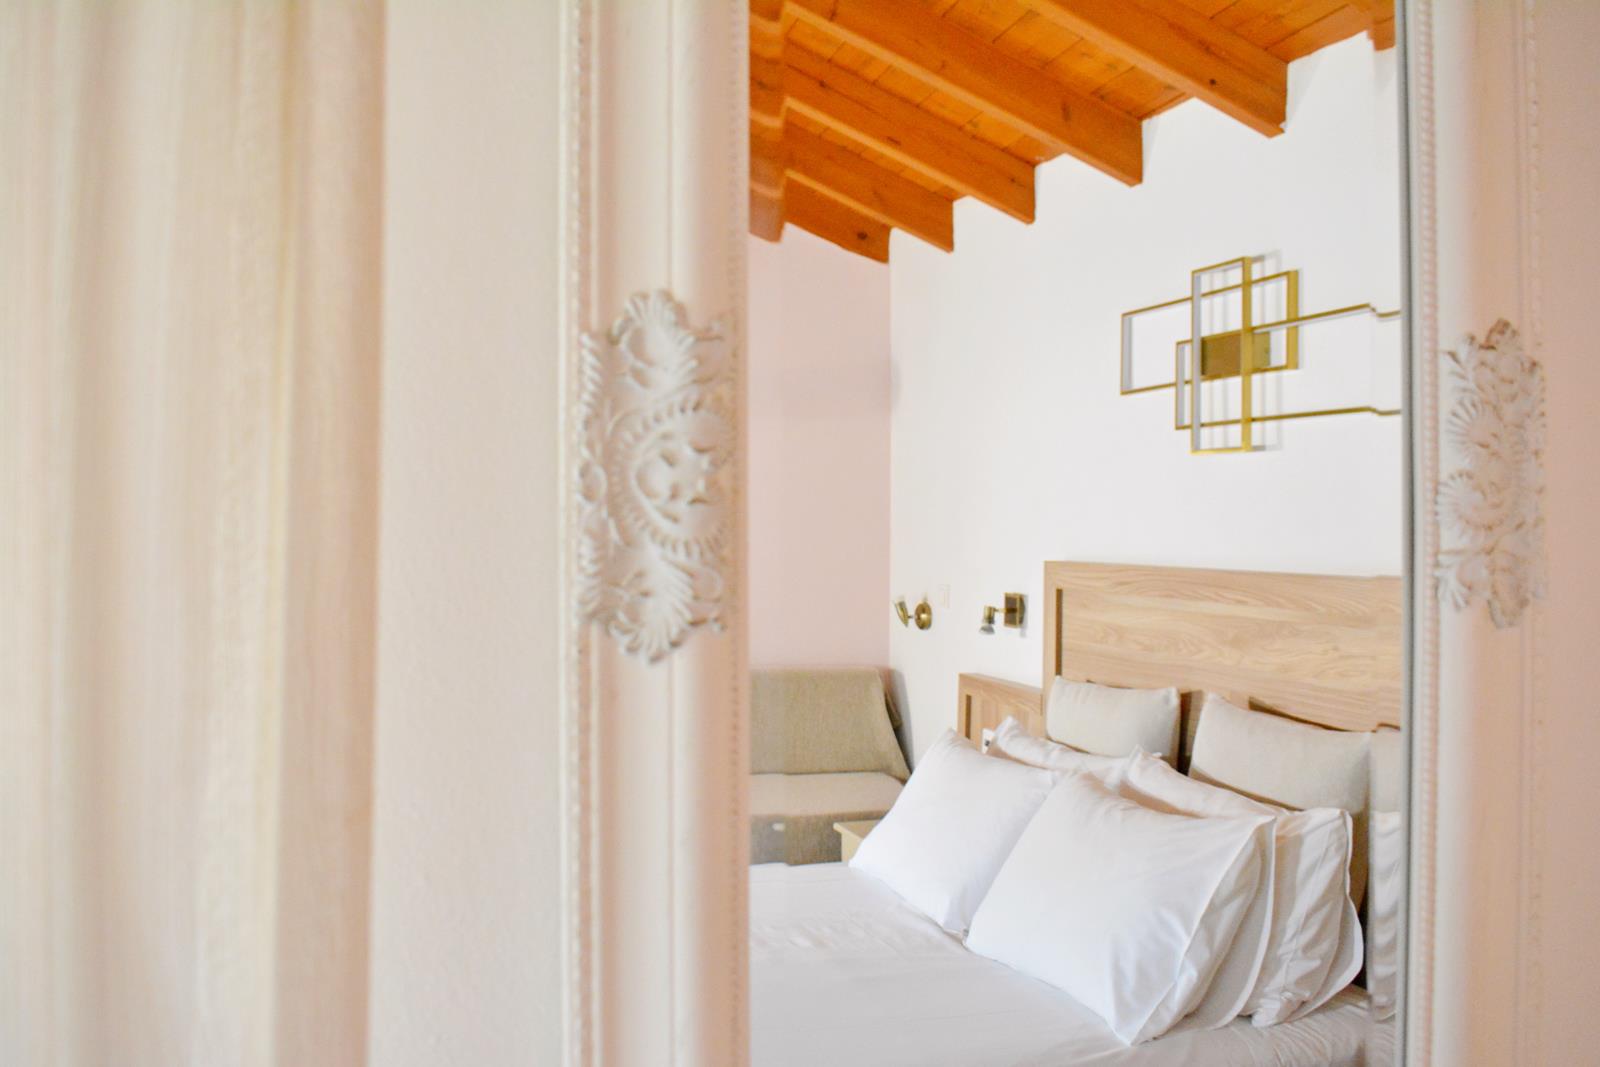 http://hotels%20in%20chania%20|%20Melinas%20House%20|%20Chania,%20Crete